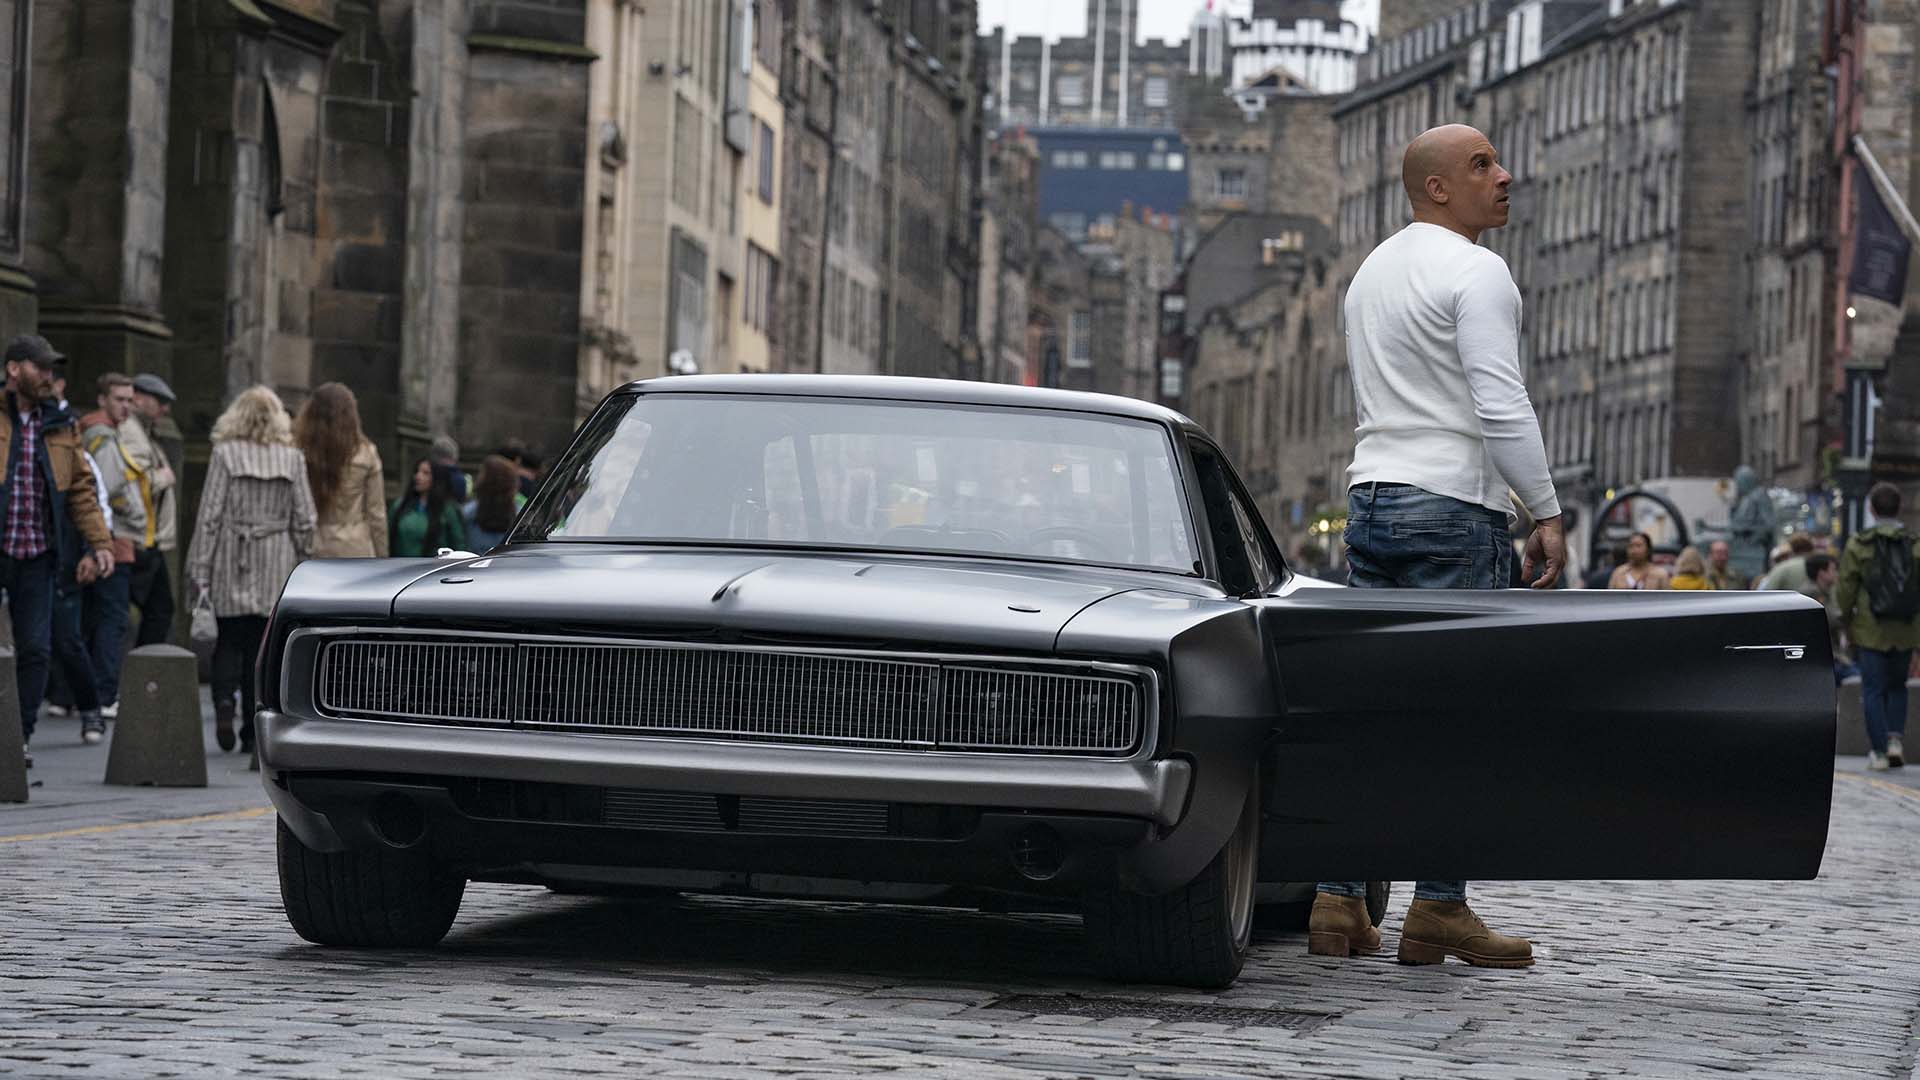 The New 'Fast and Furious 9' Trailer Teases Rocket Cars, Big Returns and a Fierce Sibling Rivalry